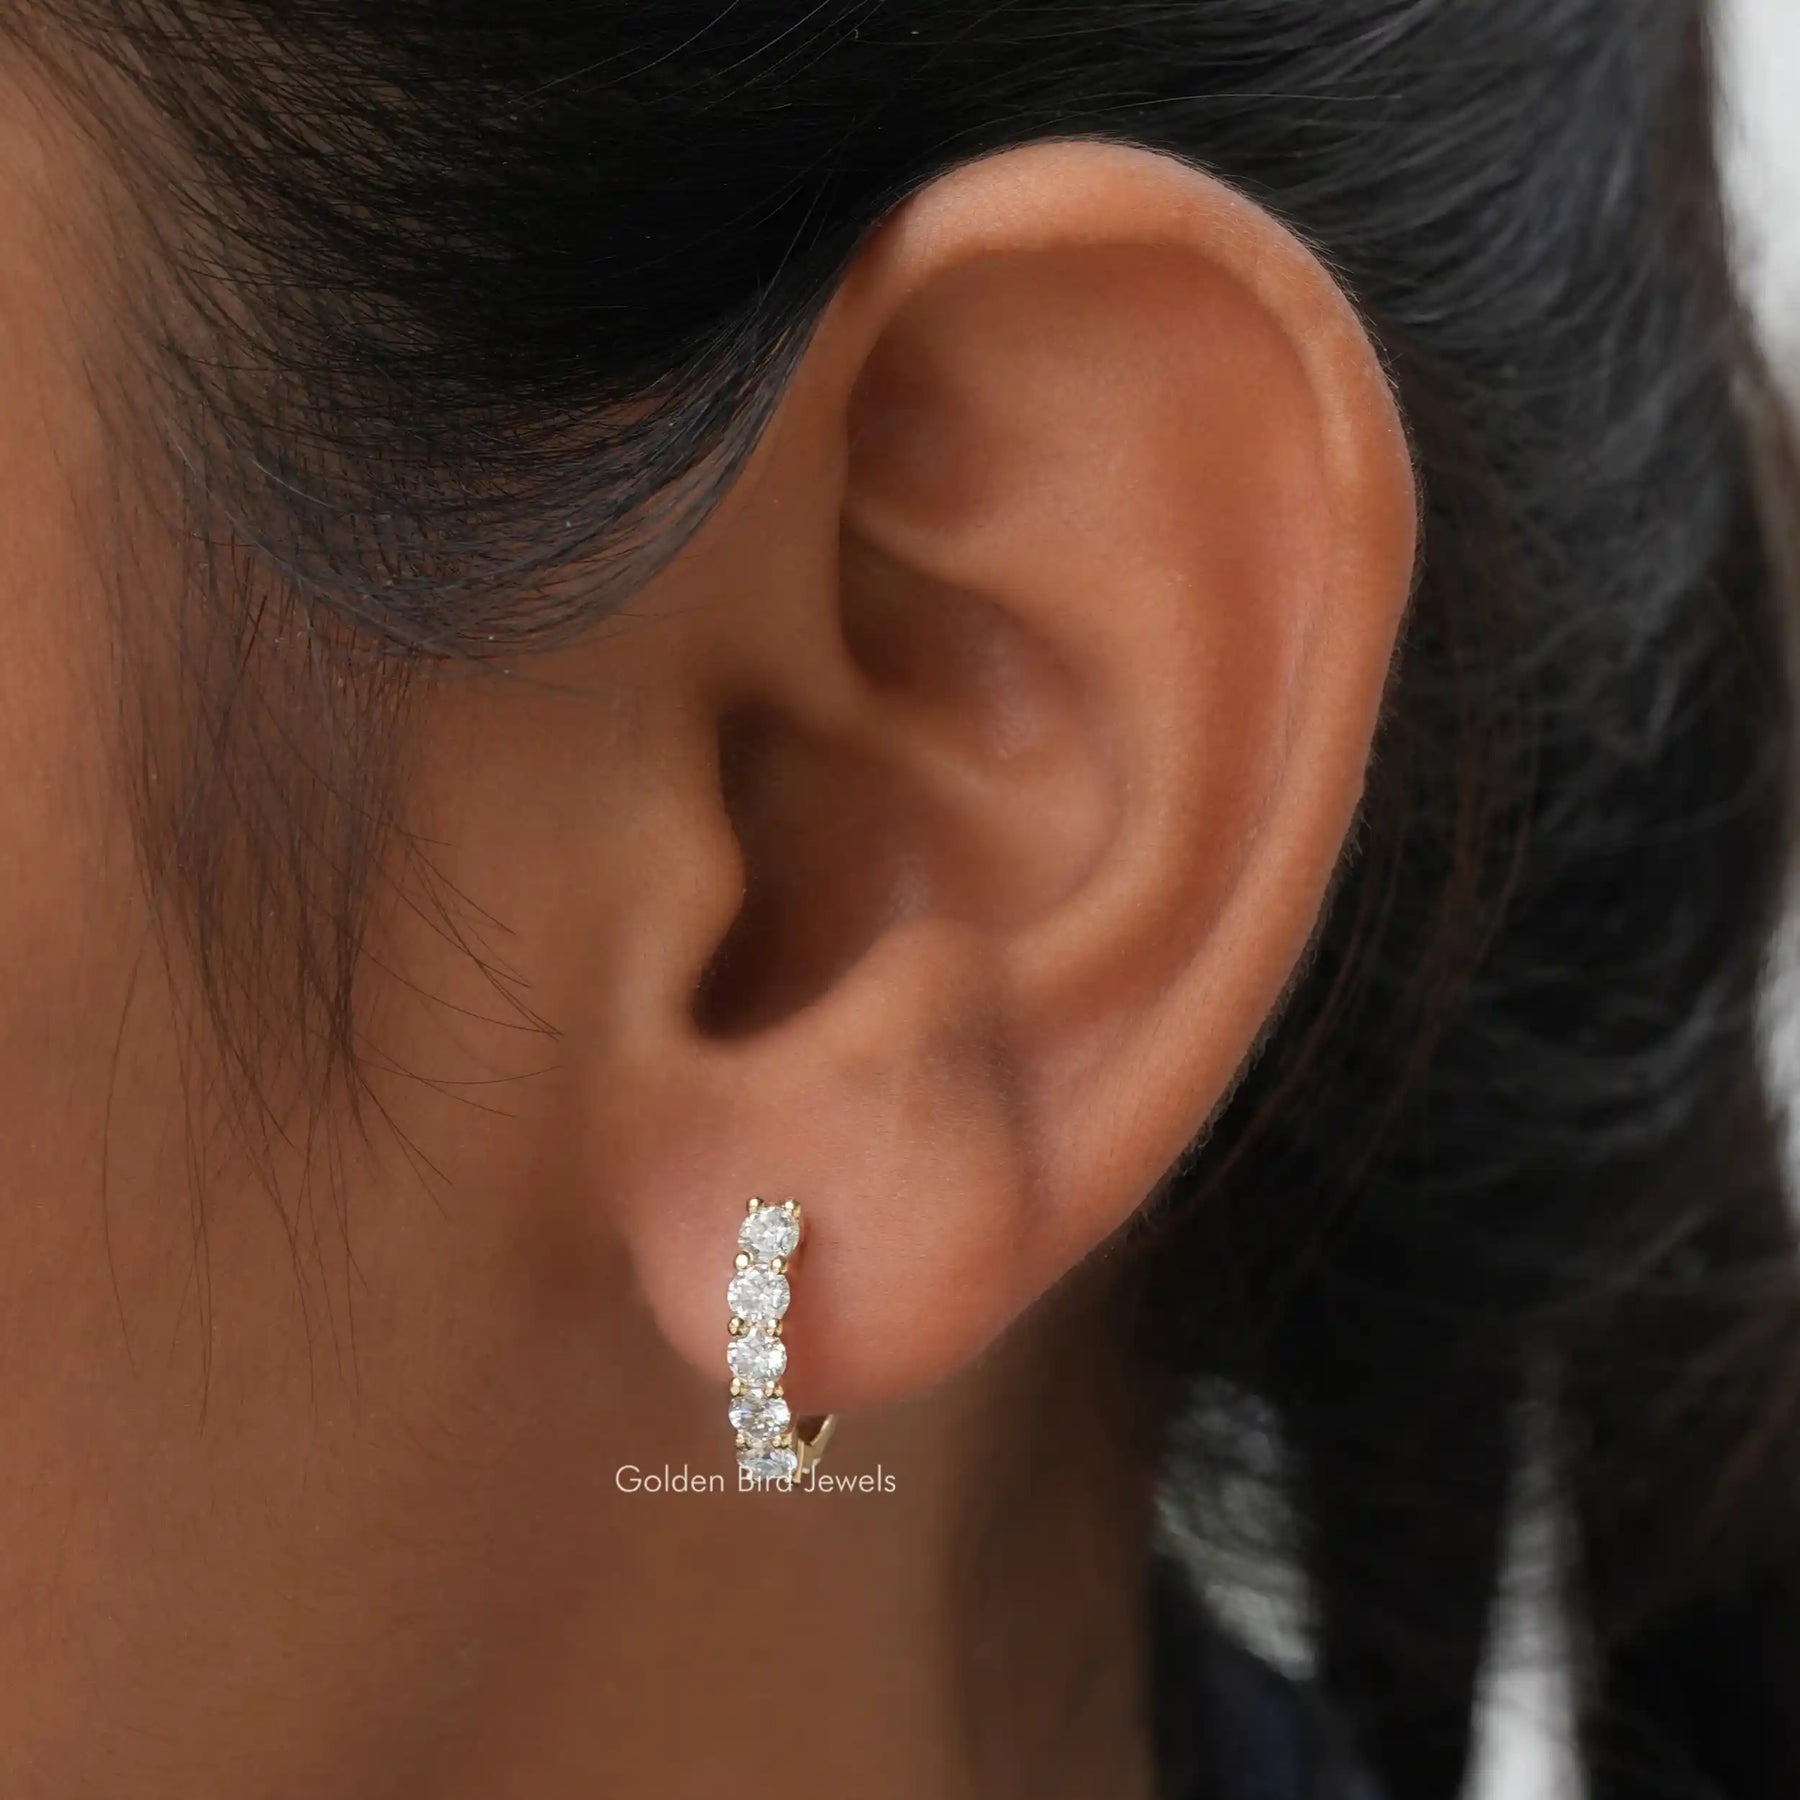 [This moissanite hoops earrings made of vvs clarity]-[Golden Bird Jewels]